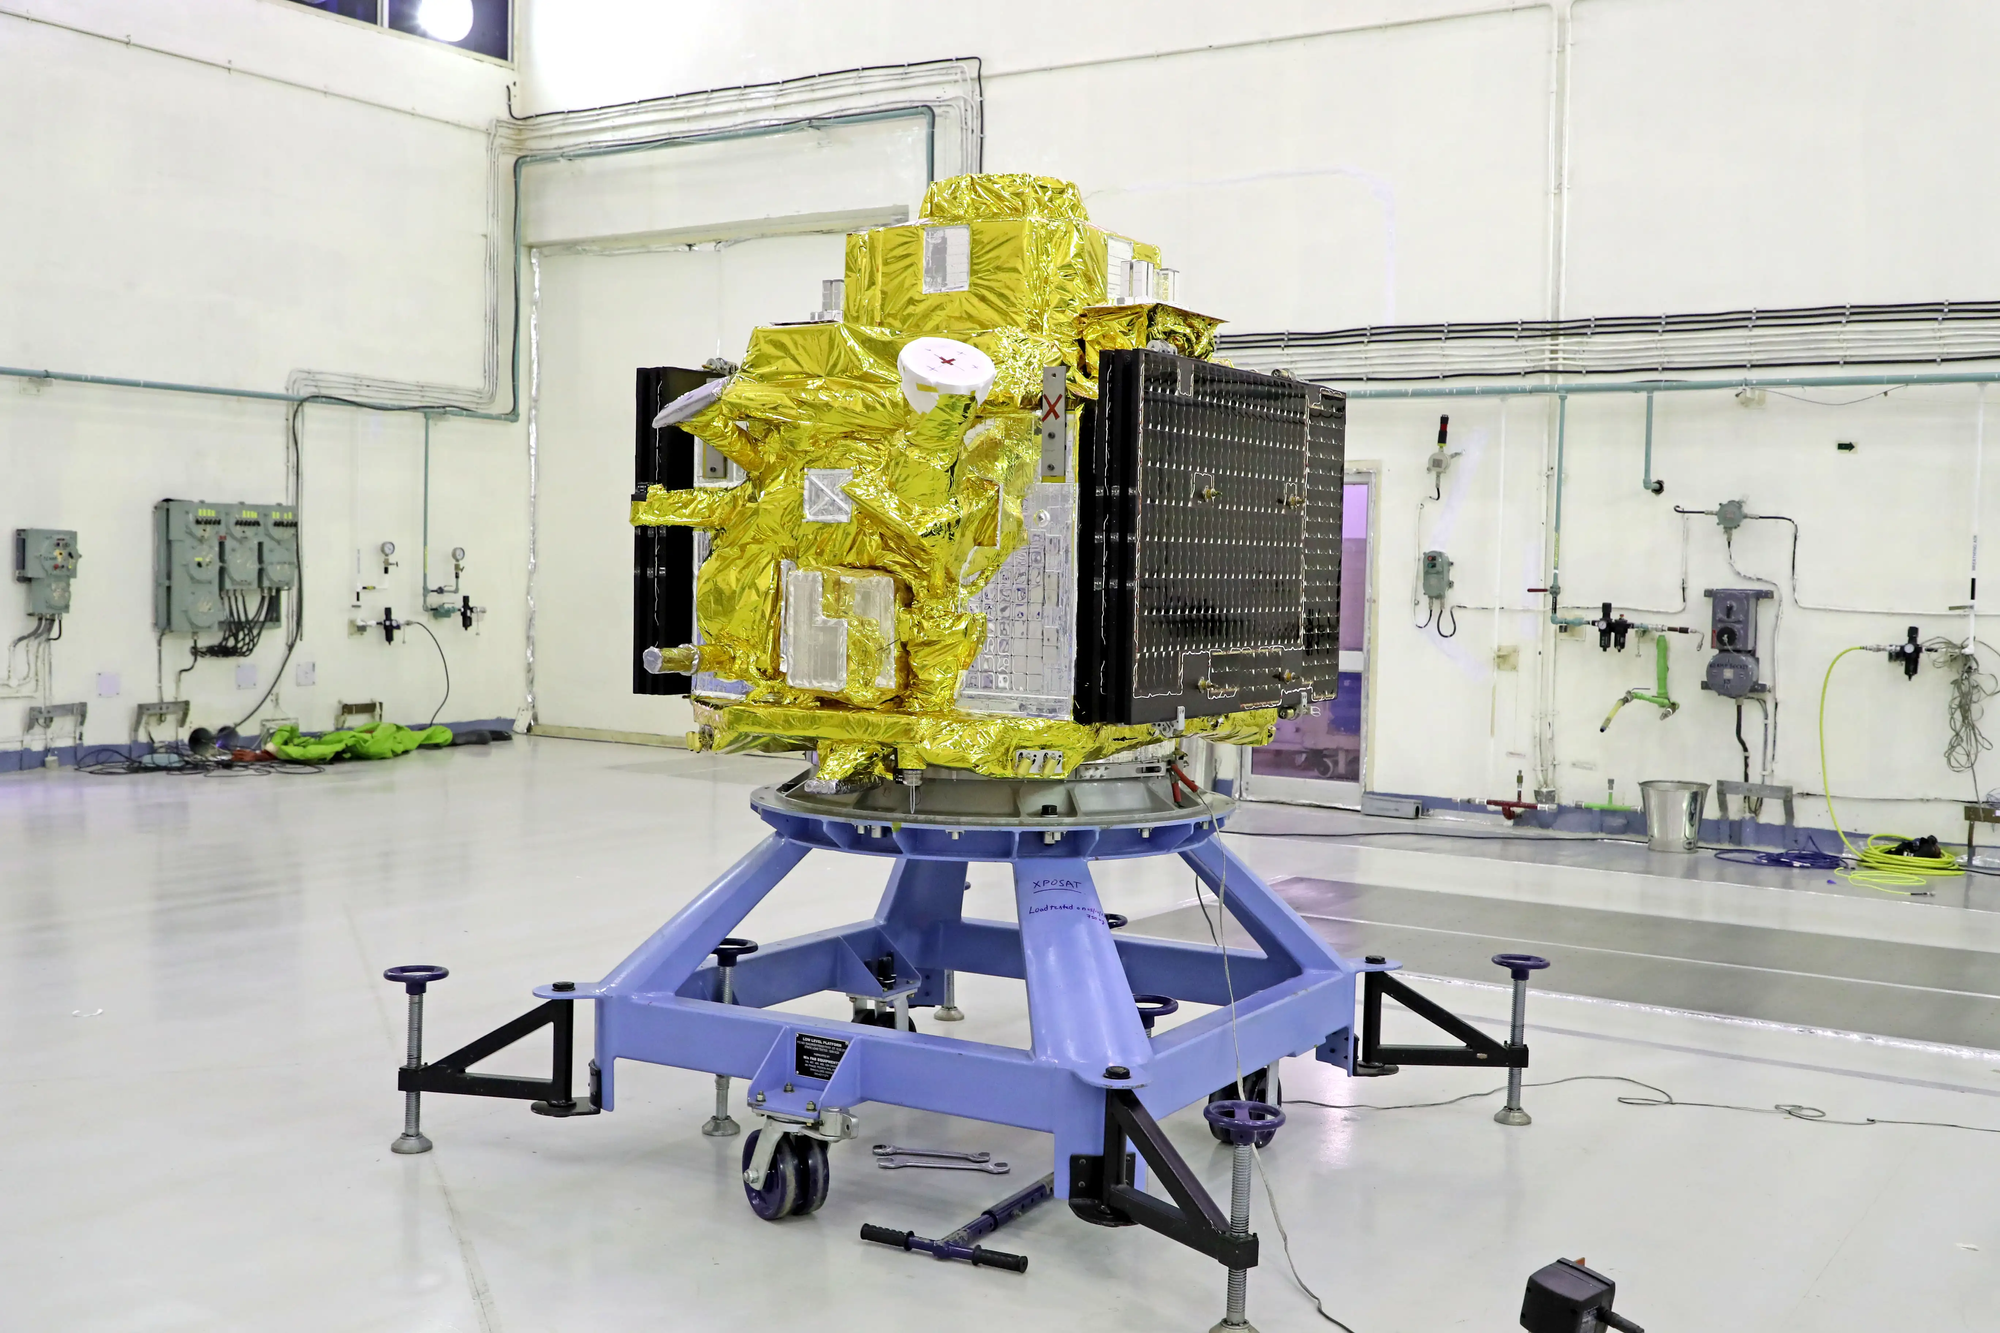 XPoSat during payload processing prior to being encapsulated. ©ISRO